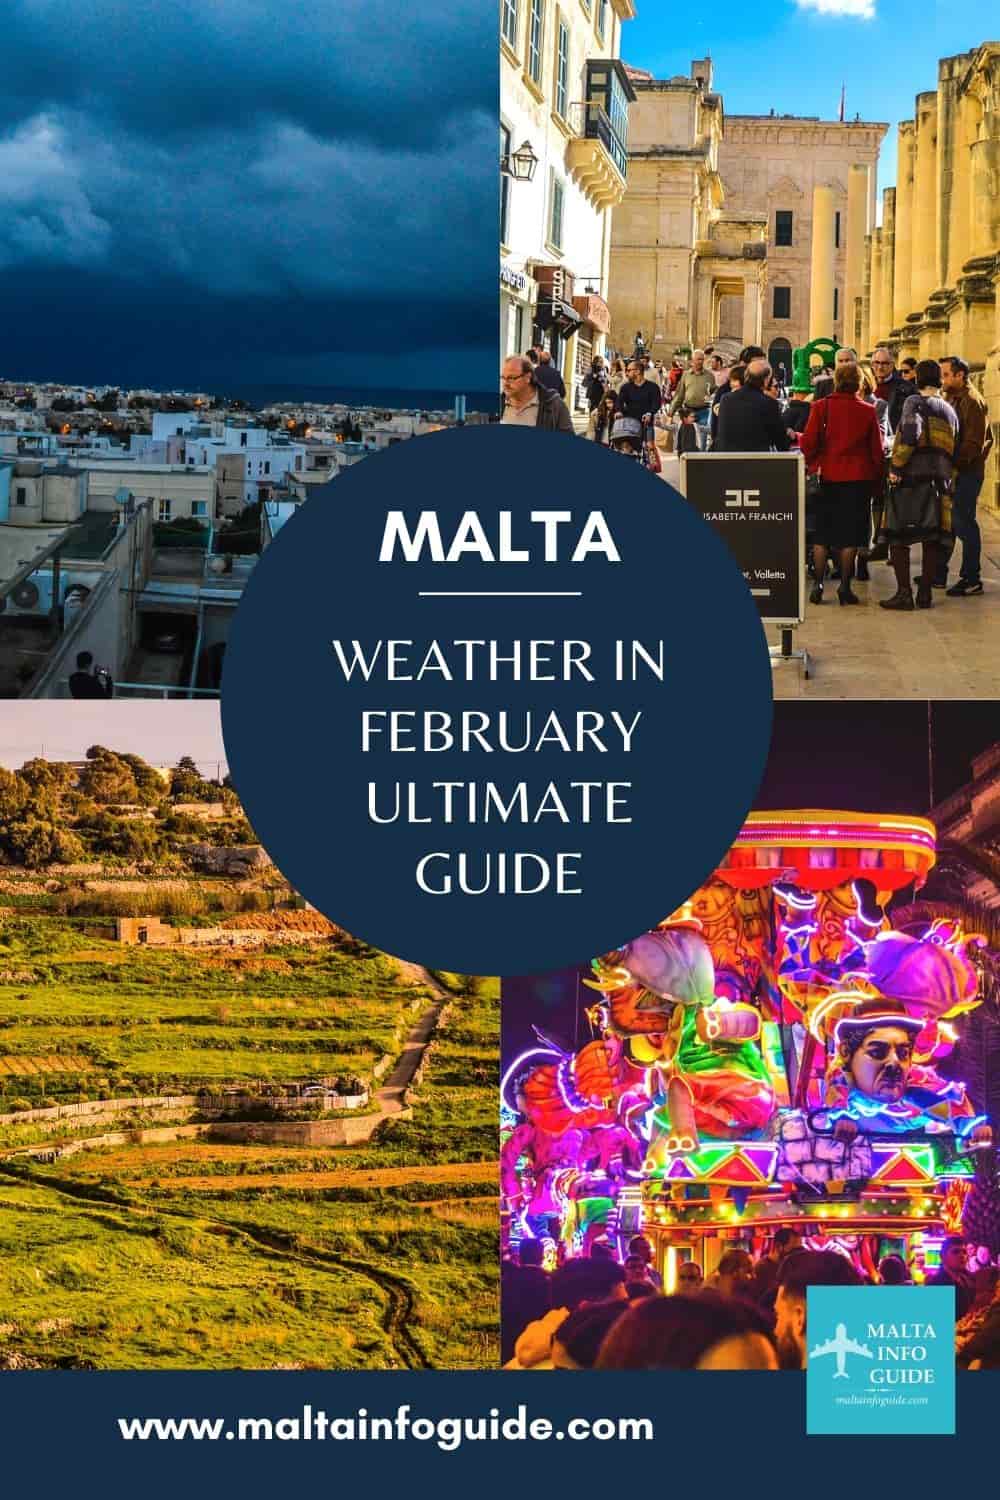 It is cold but also Sunny. Winter is with us. See further details on our ultimate guide to the weather in Malta in February.